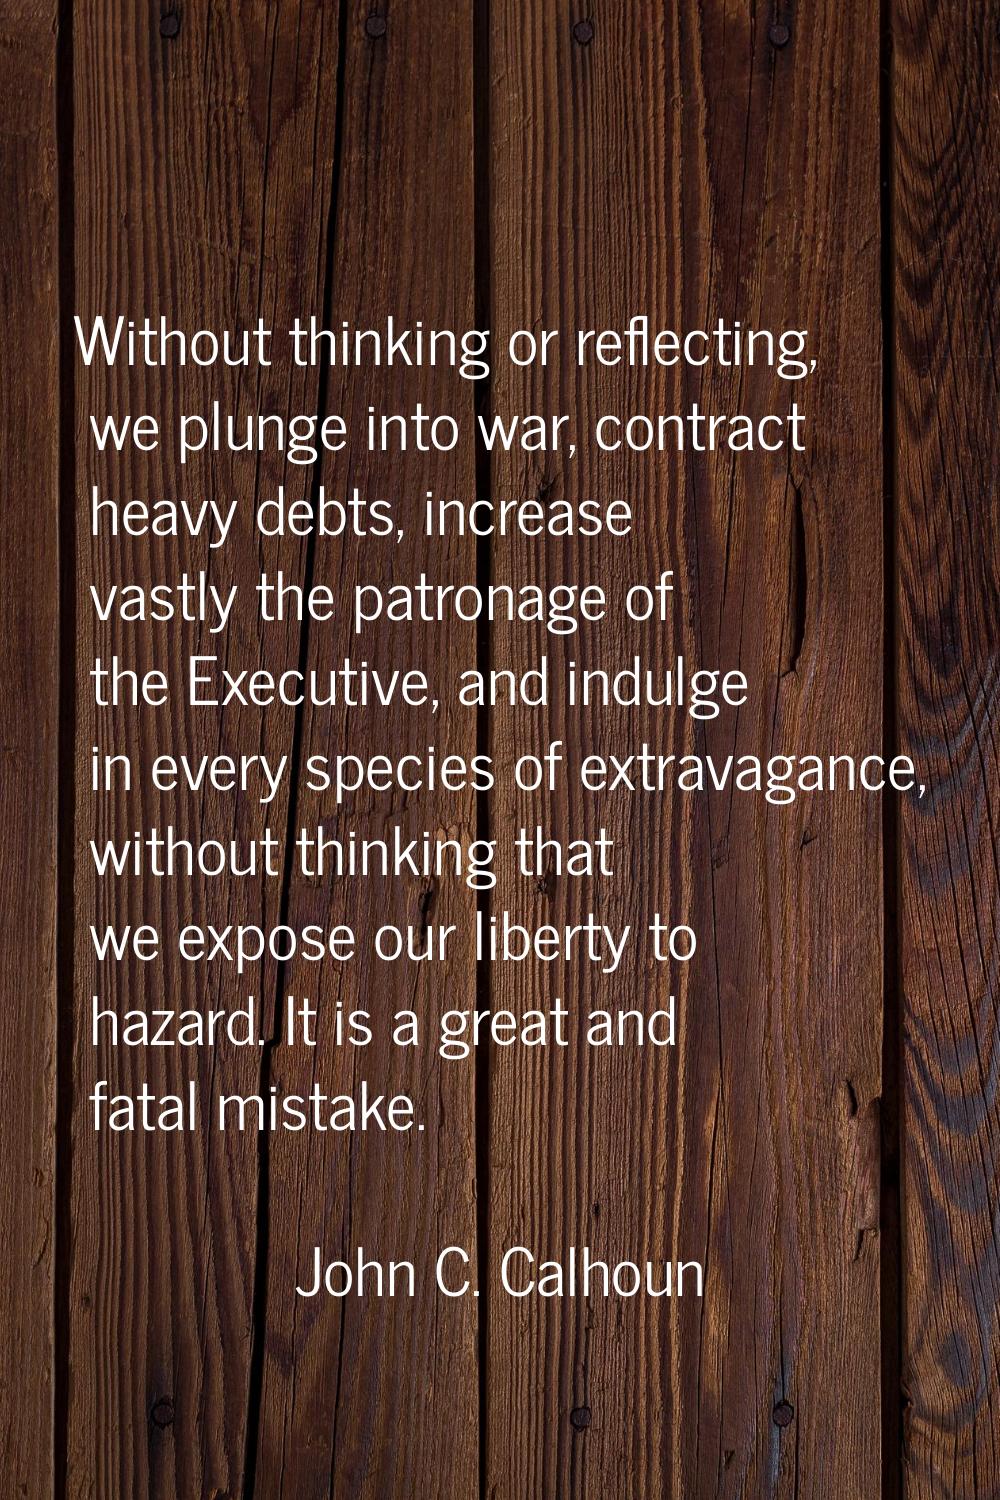 Without thinking or reflecting, we plunge into war, contract heavy debts, increase vastly the patro